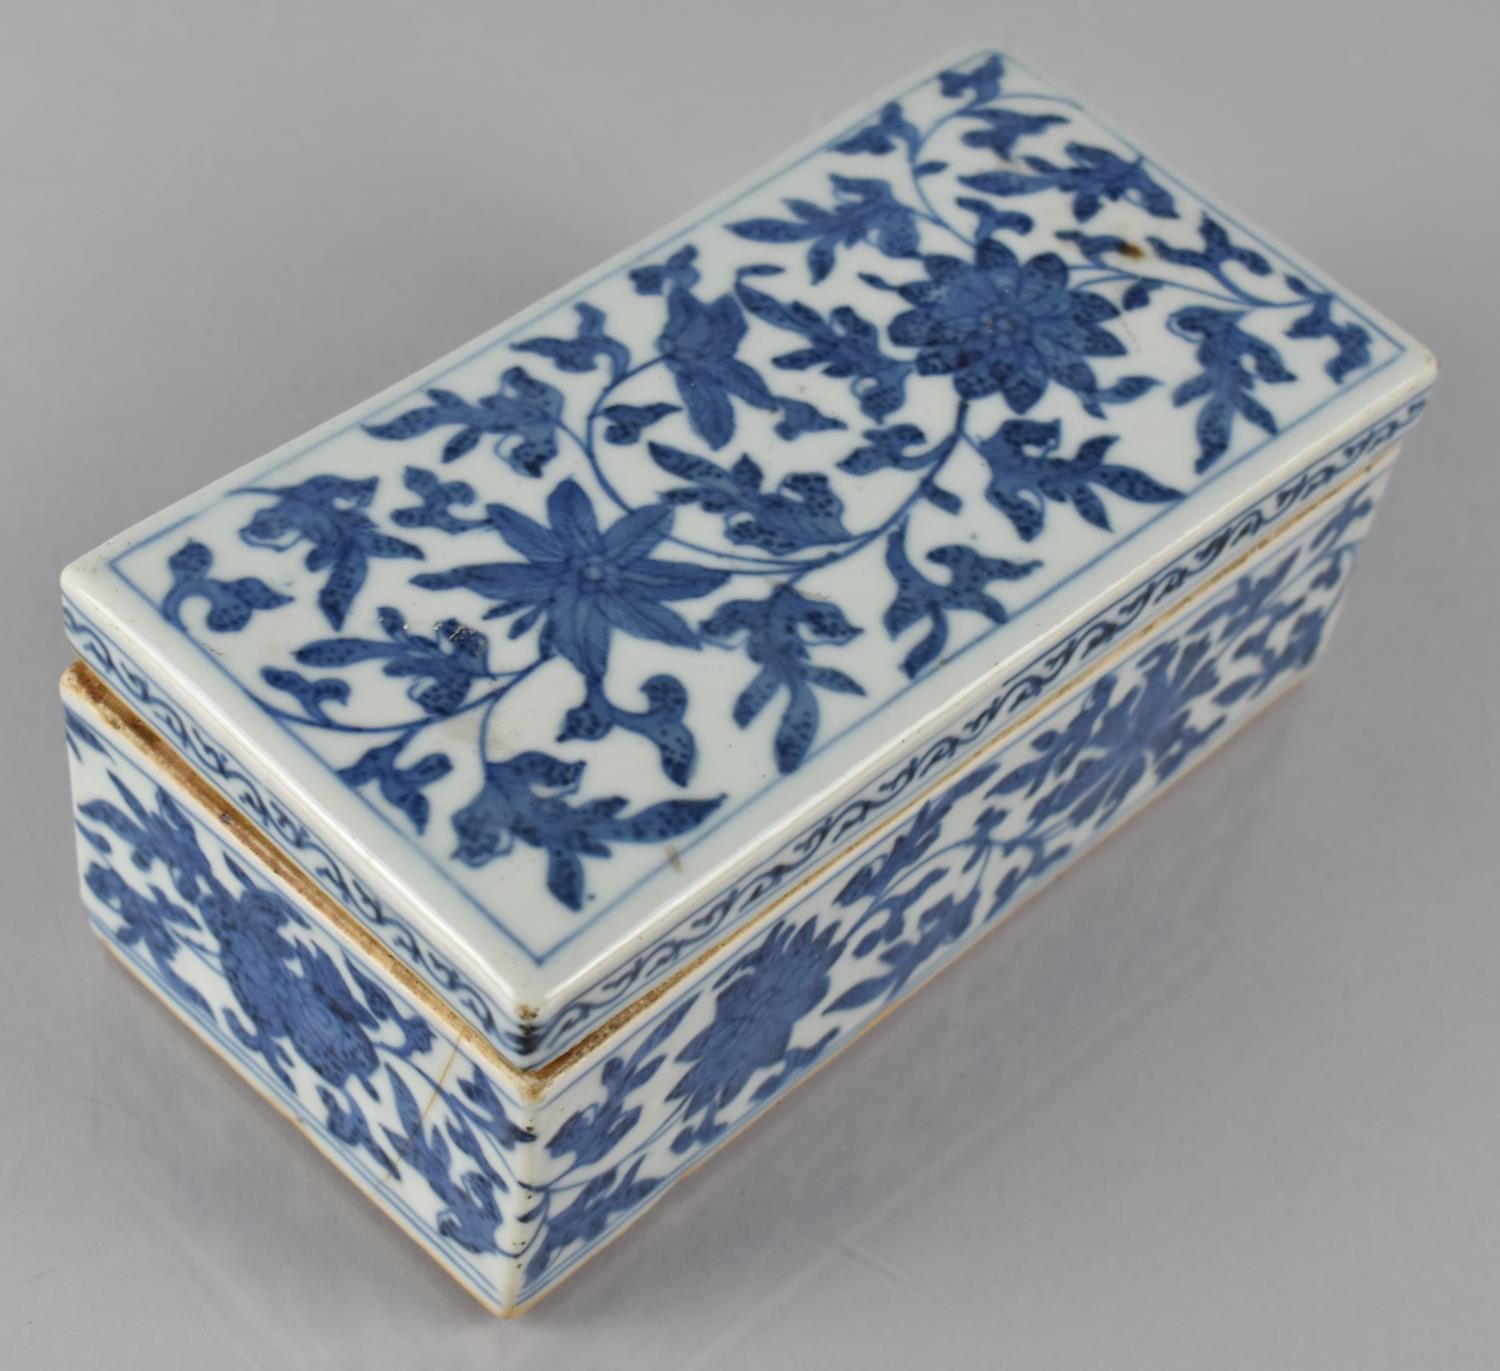 A Chinese Porcelain Blue and White Pen Box and Cover of Rectangular Form, 18.5x9.5x7.5cms High - Image 2 of 3